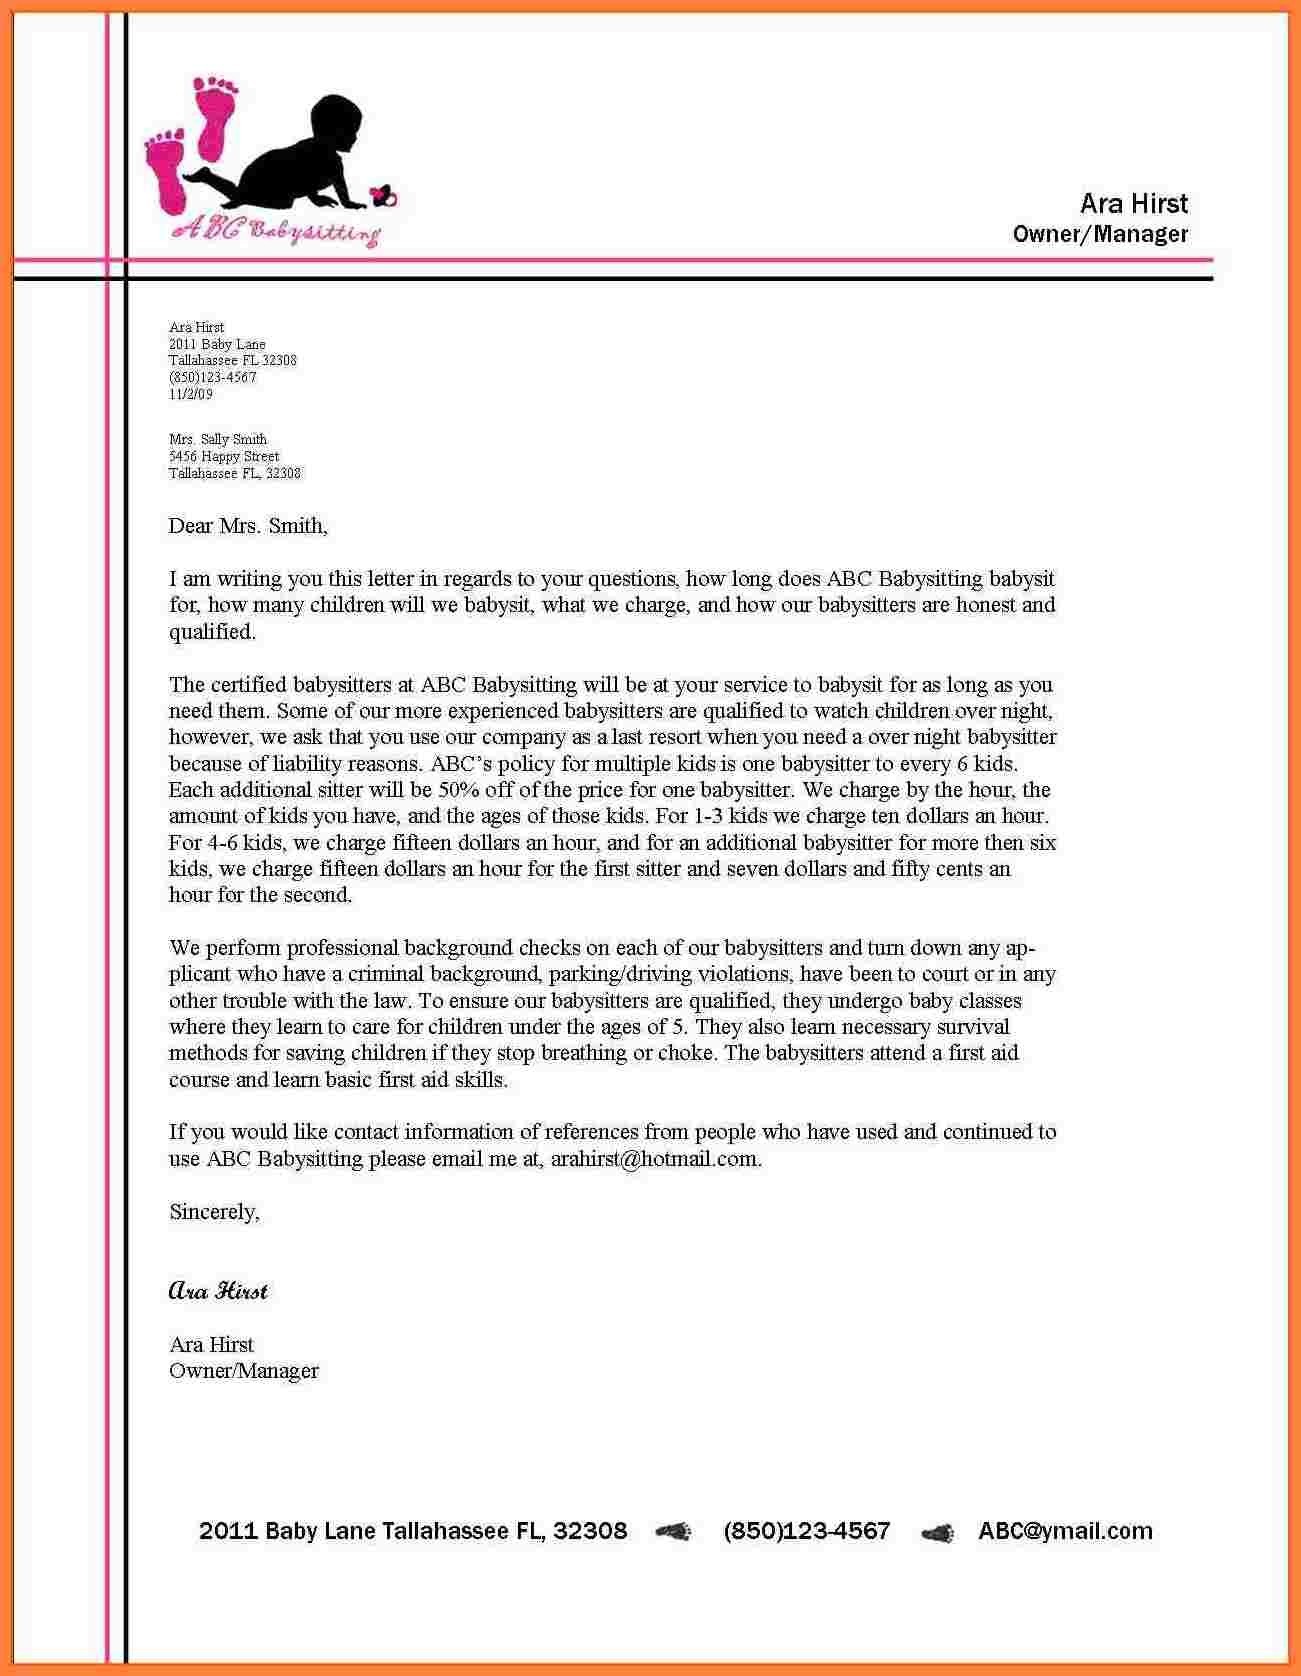 Business Letter Format With Letterhead Scrumps